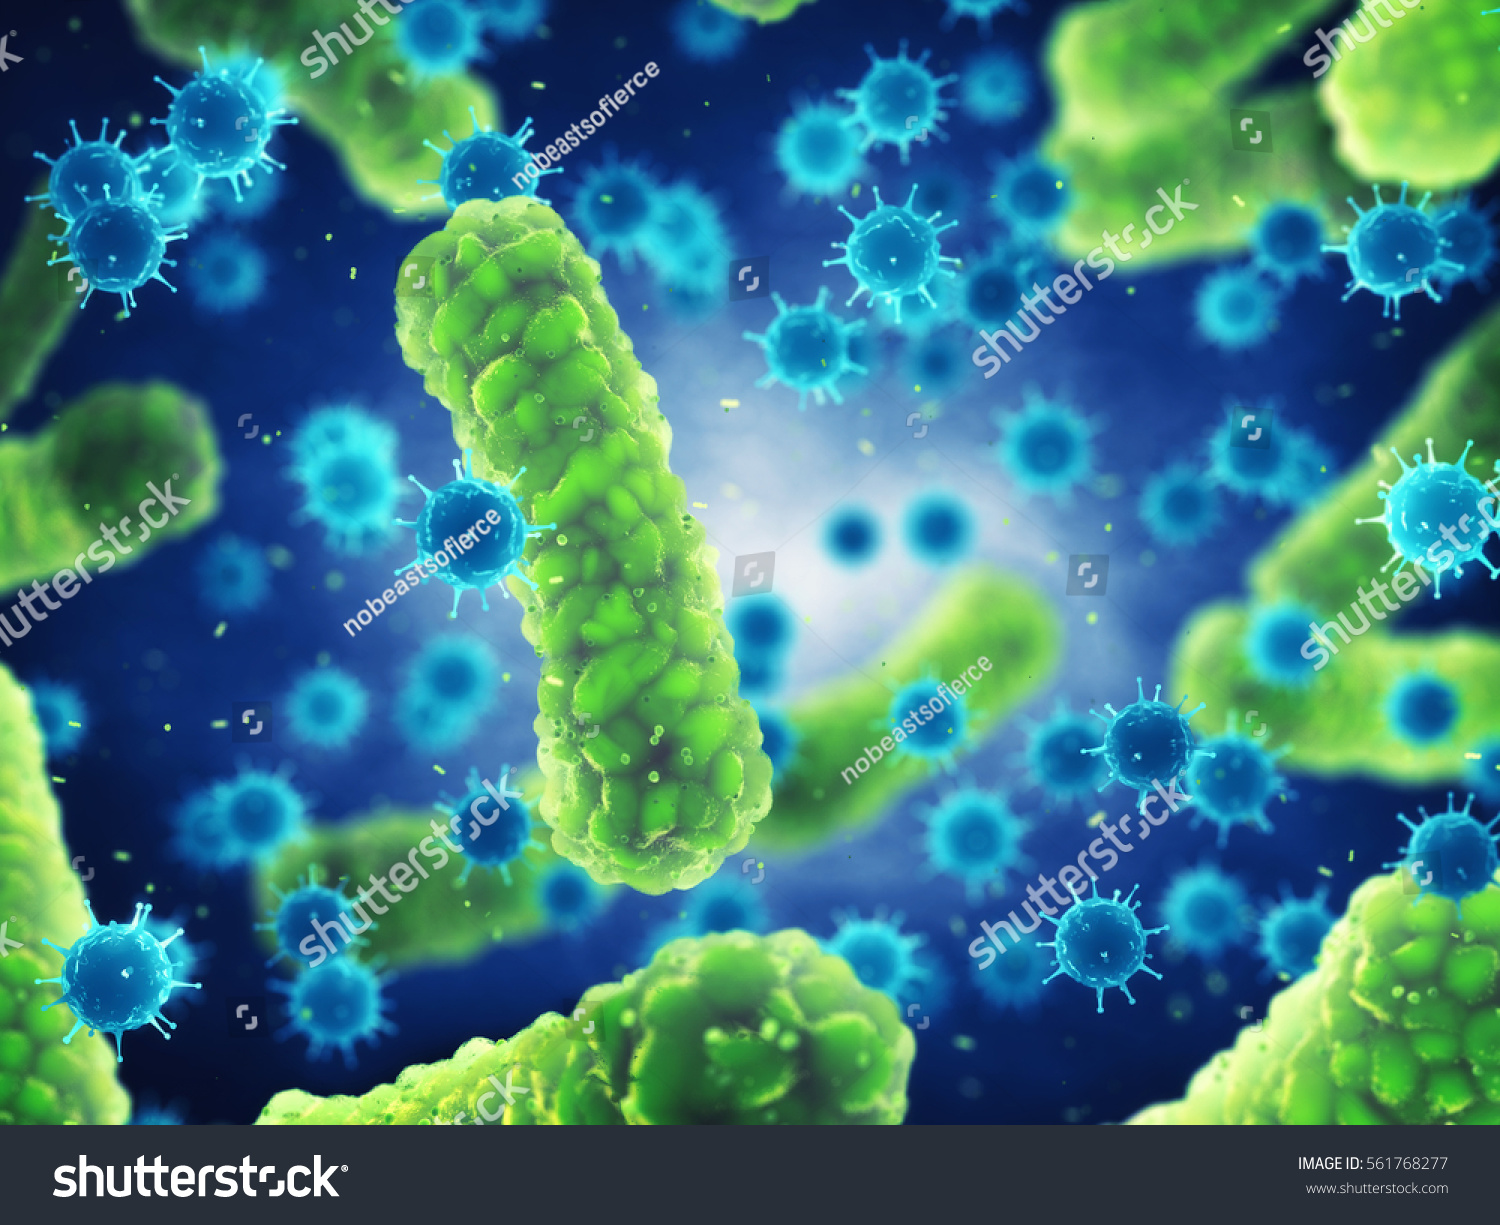 Pictures Of Germs And Viruses 25